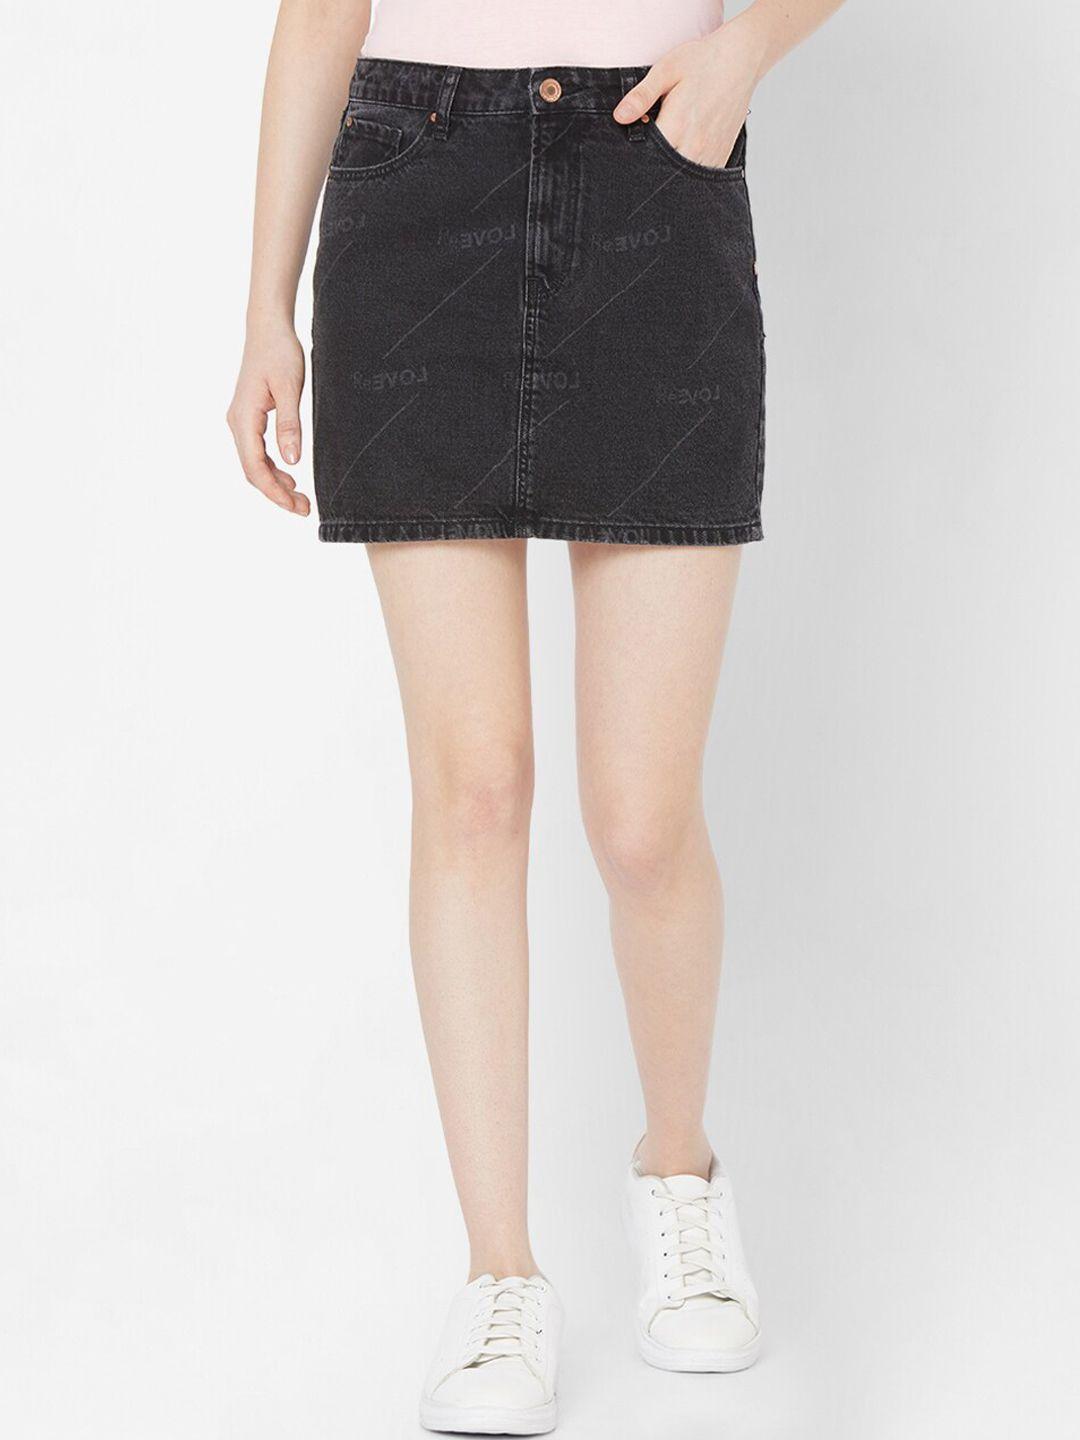 spykar black solid relaxed mid-rise pure cotton denim skirts